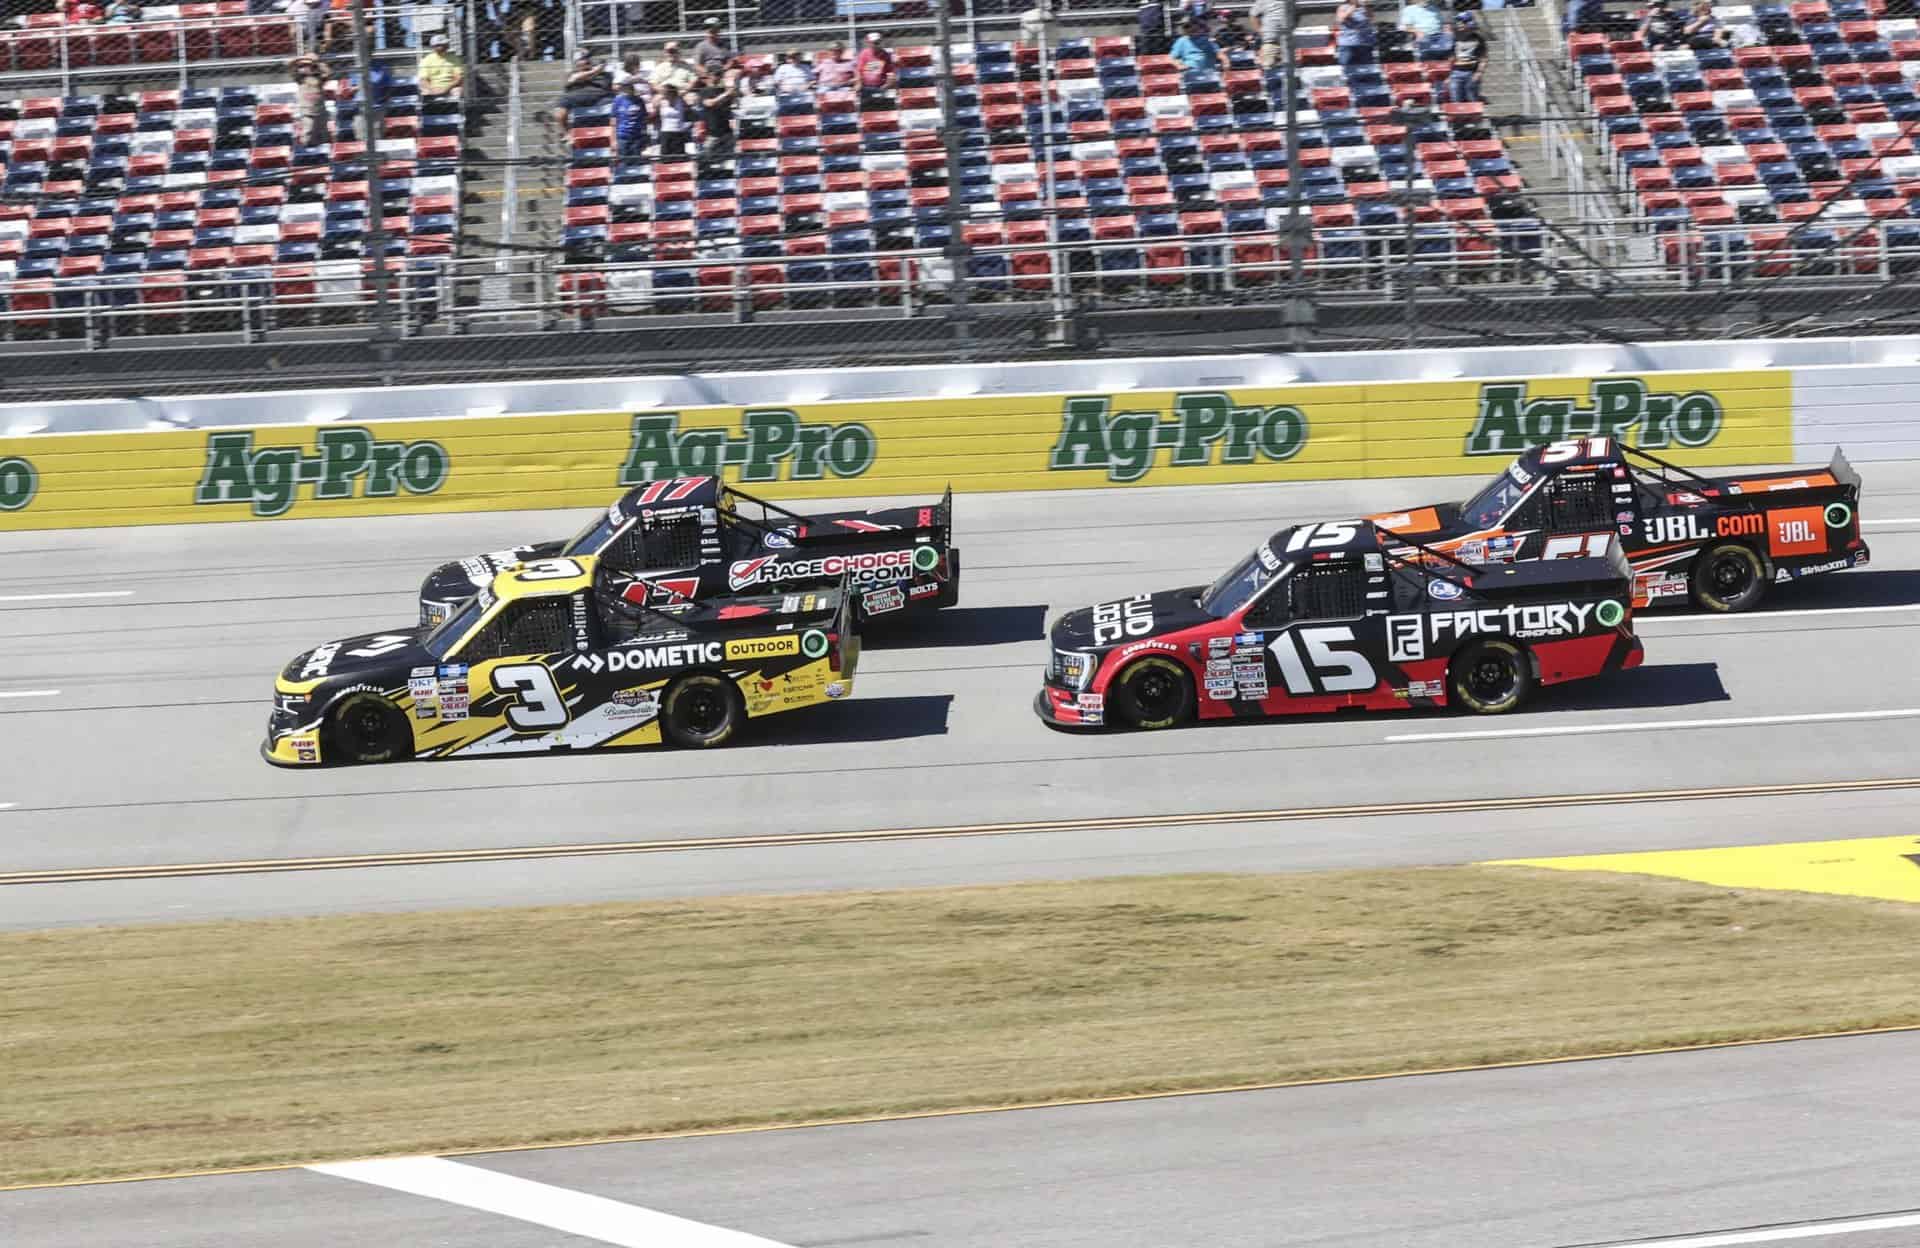 Jordan Anderson racing at Talladega Superspeedway in the 2022 Chevy Silverado 250 for Jordan Anderson Racing in the NASCAR Camping World Truck Series. Photo by Rachel Schuoler / Kickin' the Tires